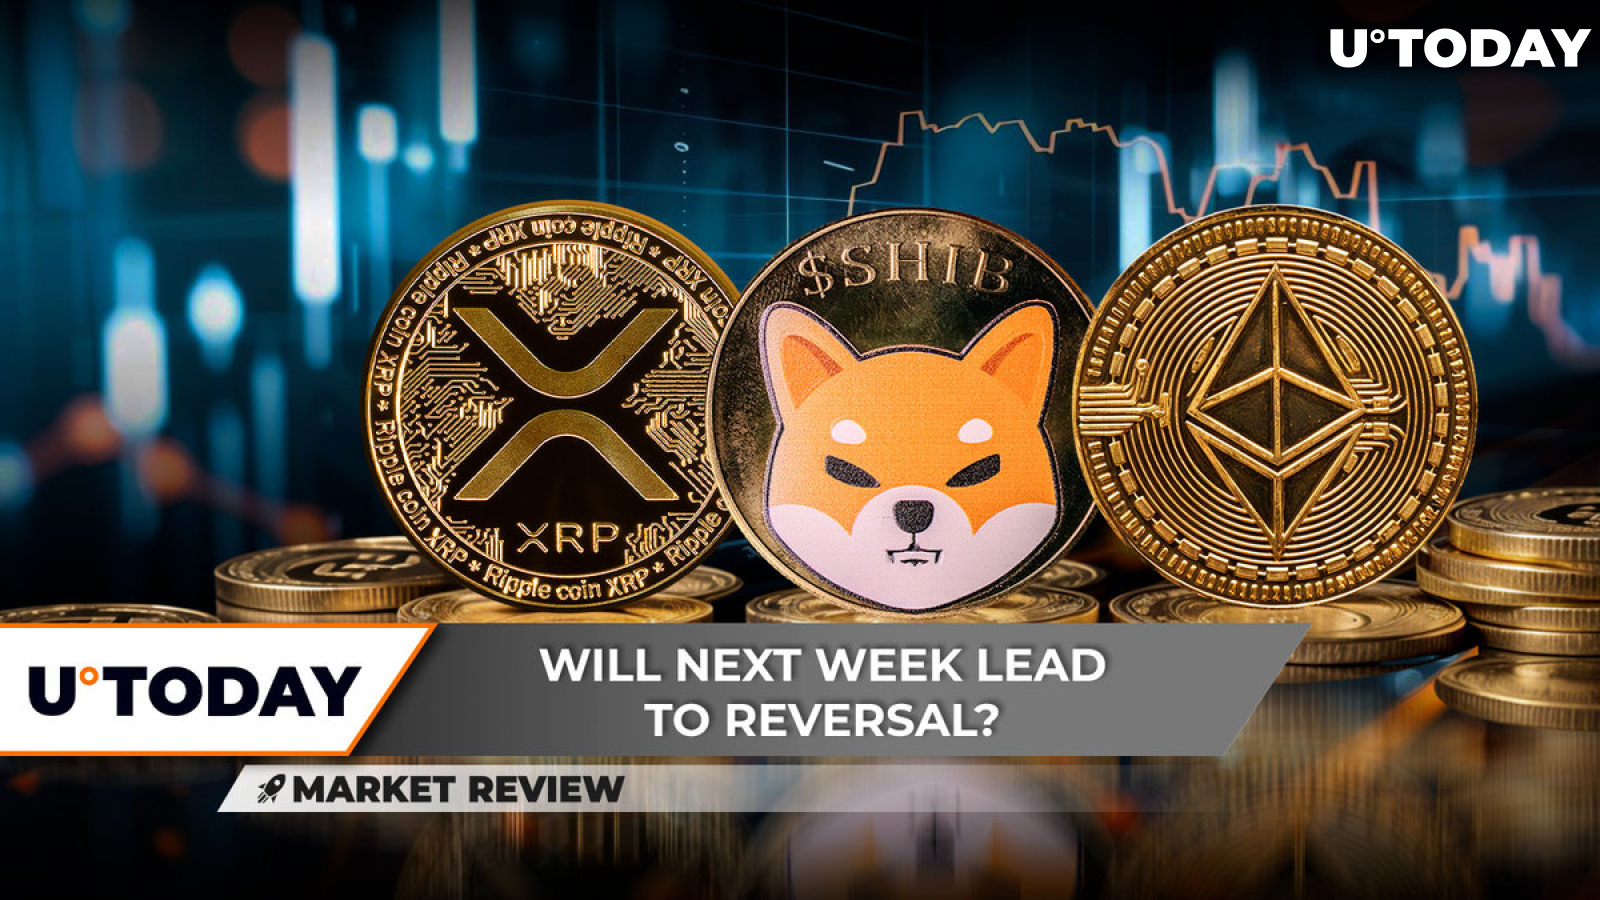 XRP Enters Reversal Zone, $0.00002 Shiba Inu (SHIB) Level Is Dangerous, Will Ethereum (ETH) Survive?